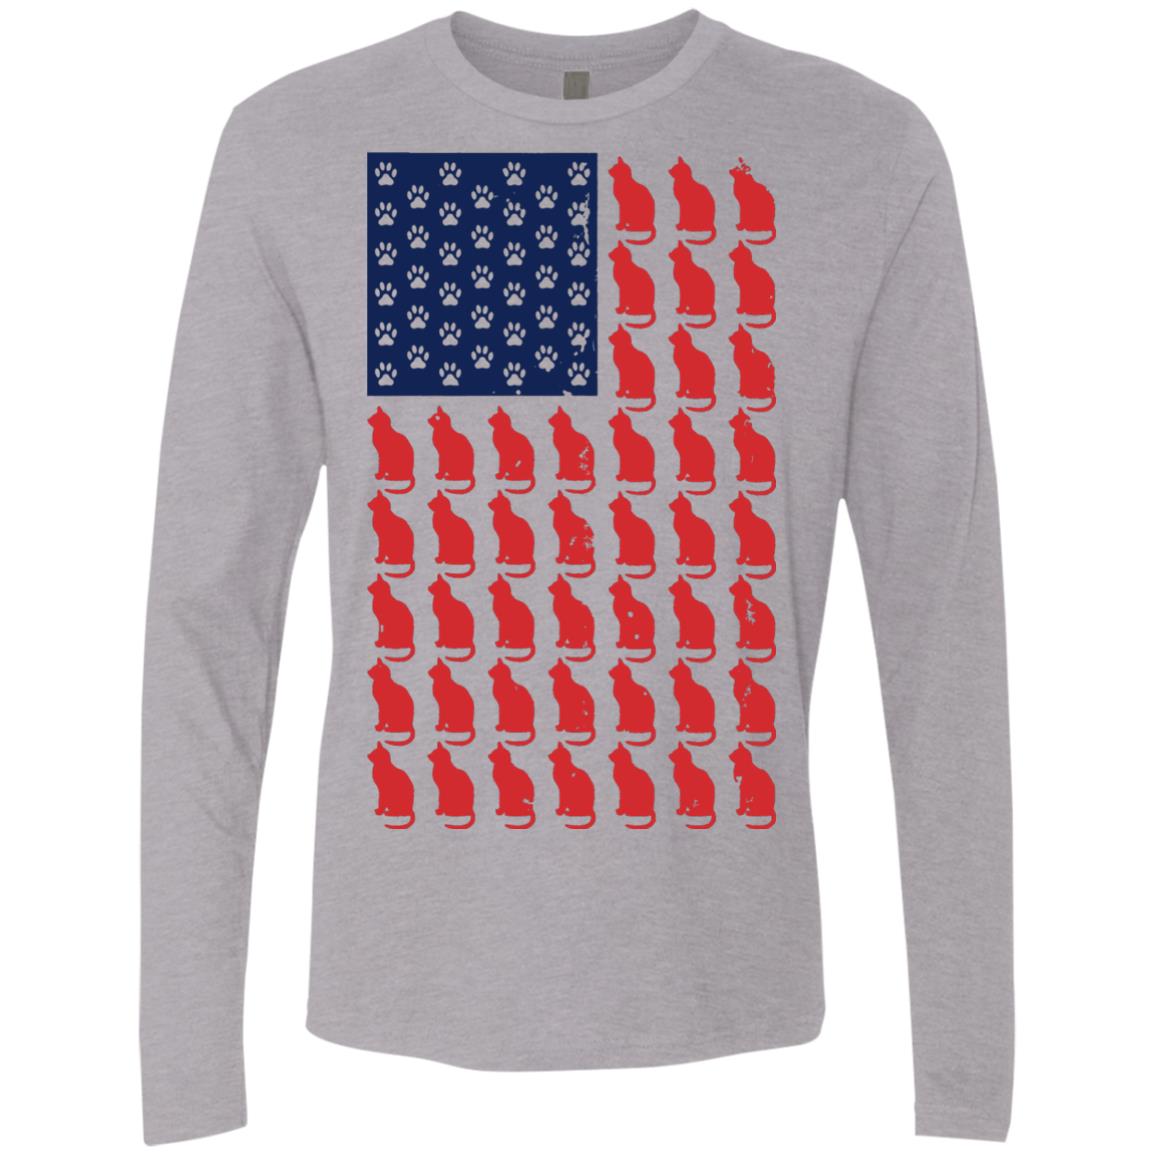 Red Cat Blue Paw Premium Long Sleeve Tee - iHeartCats.com